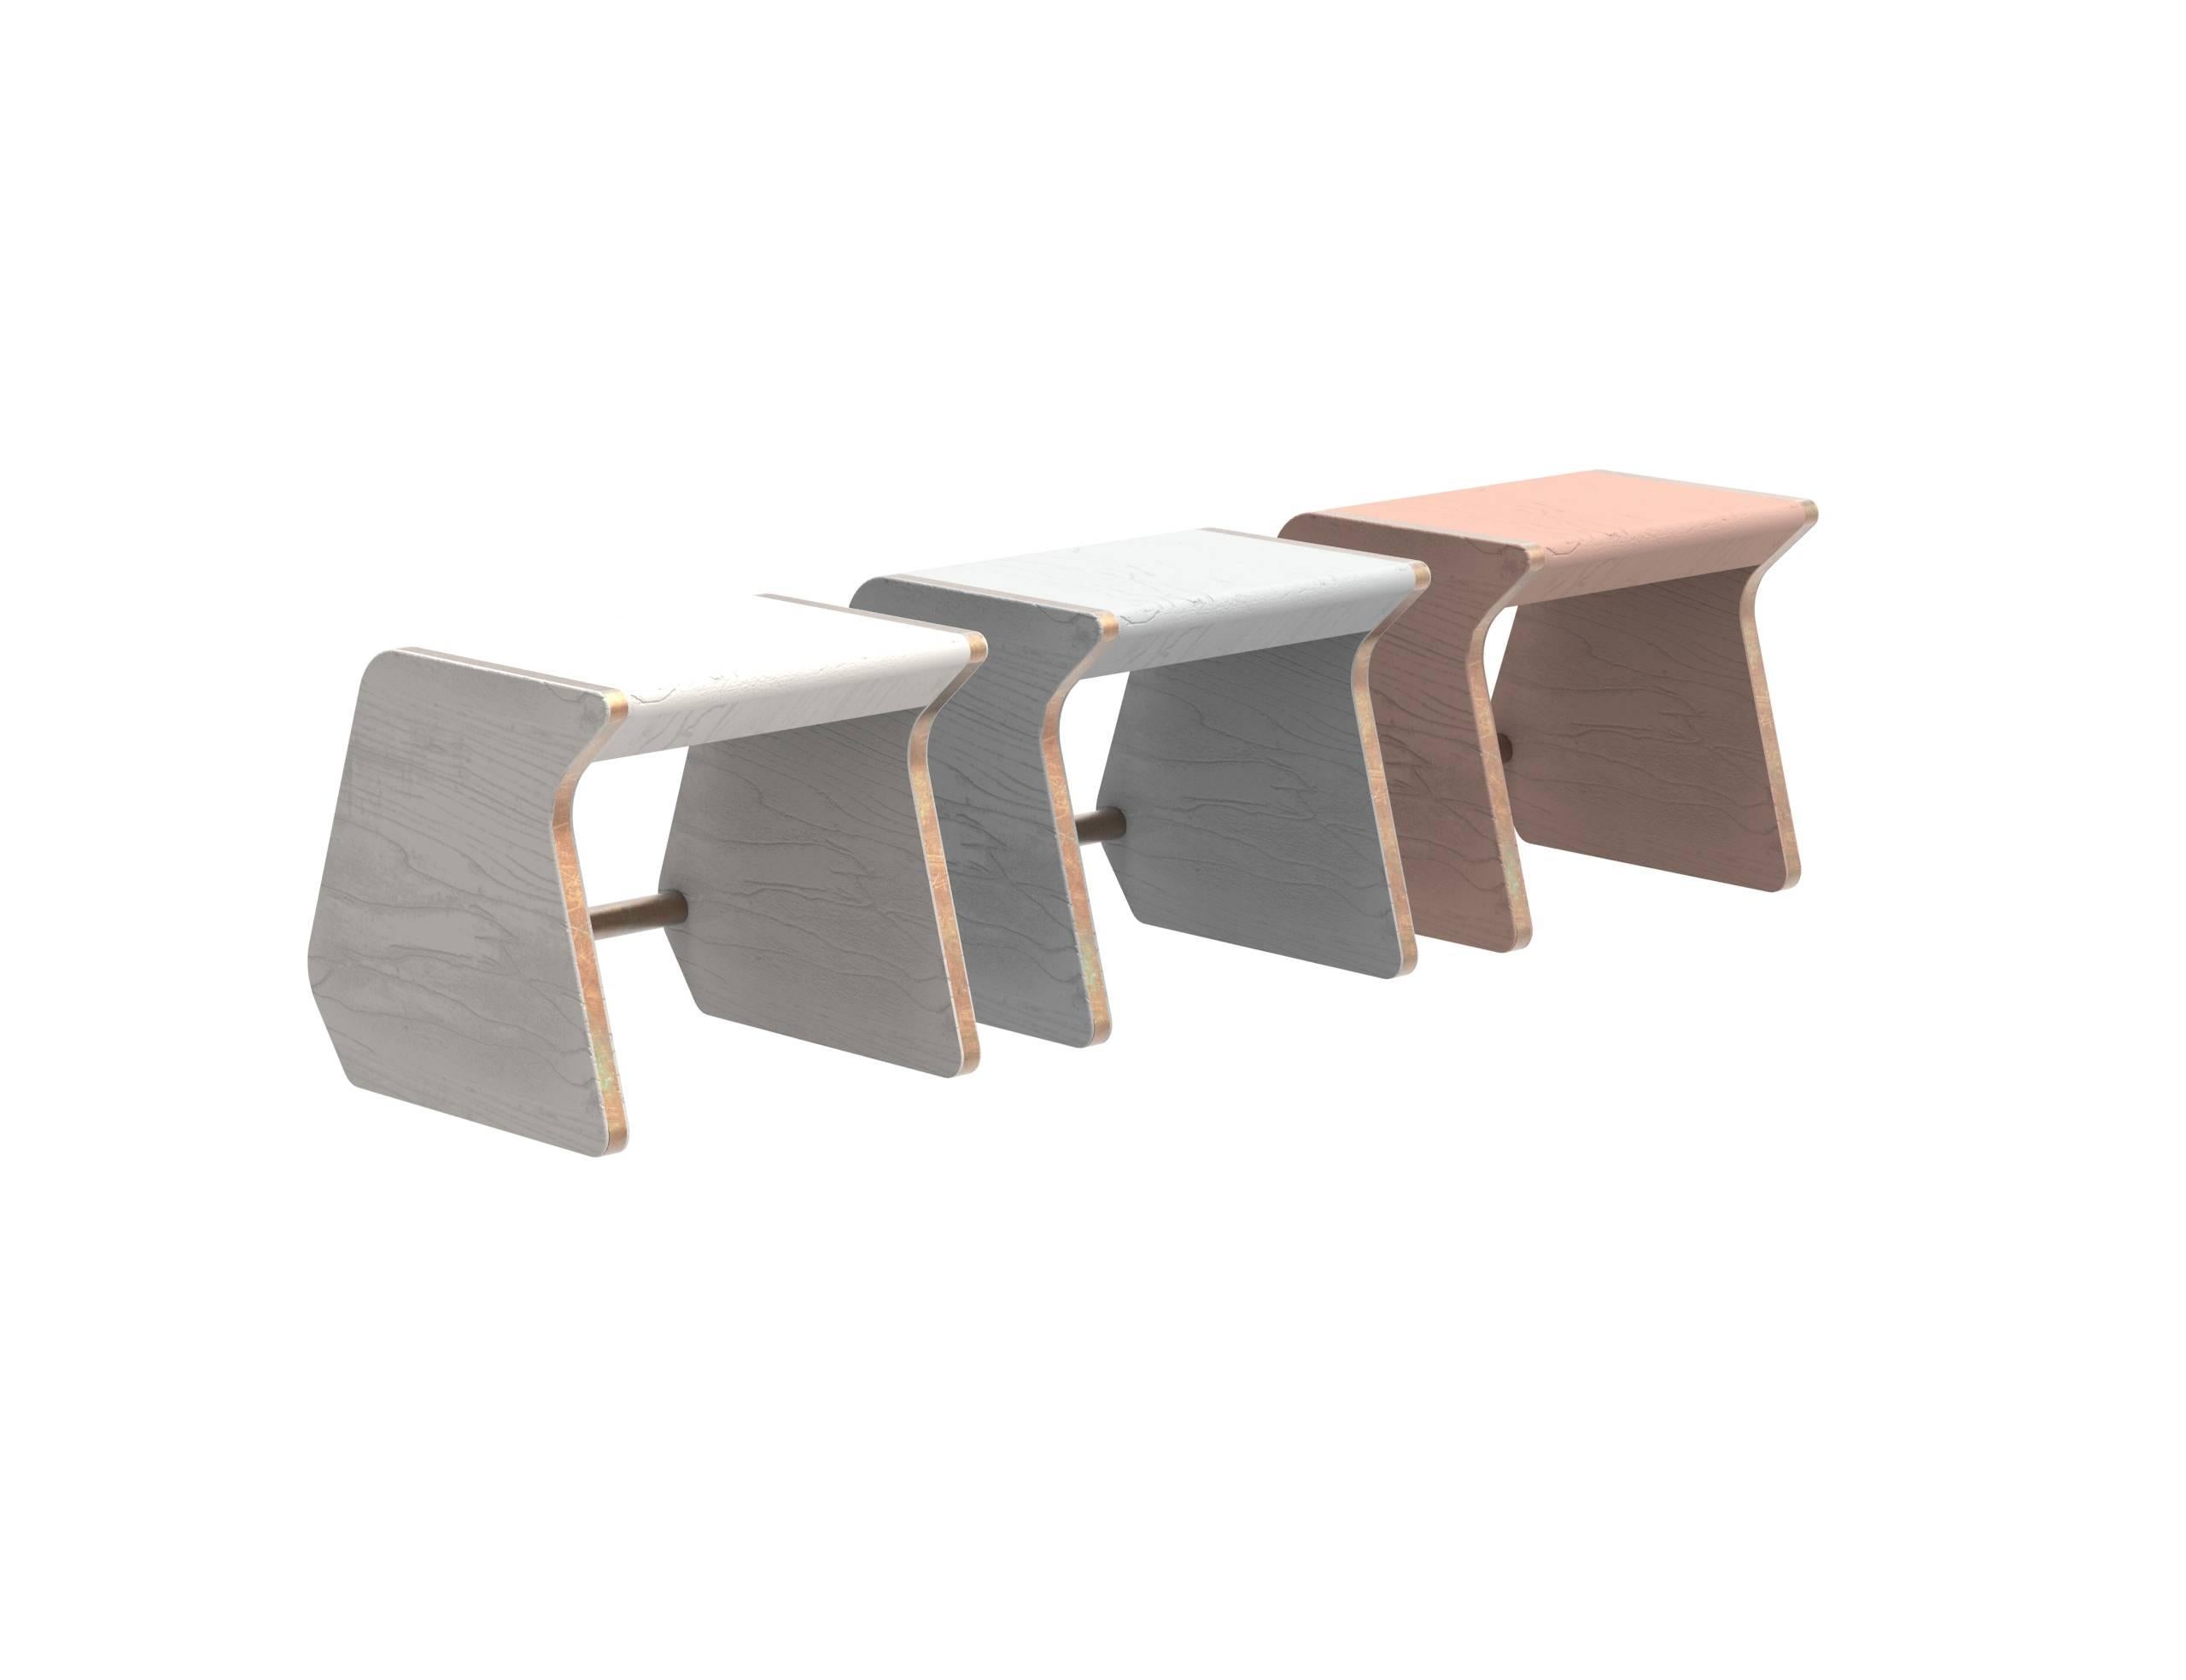 Heritage 'Perch' Child Chair by Studiokinder in Blush Pigmented Ash with Copper In Excellent Condition For Sale In New York, NY